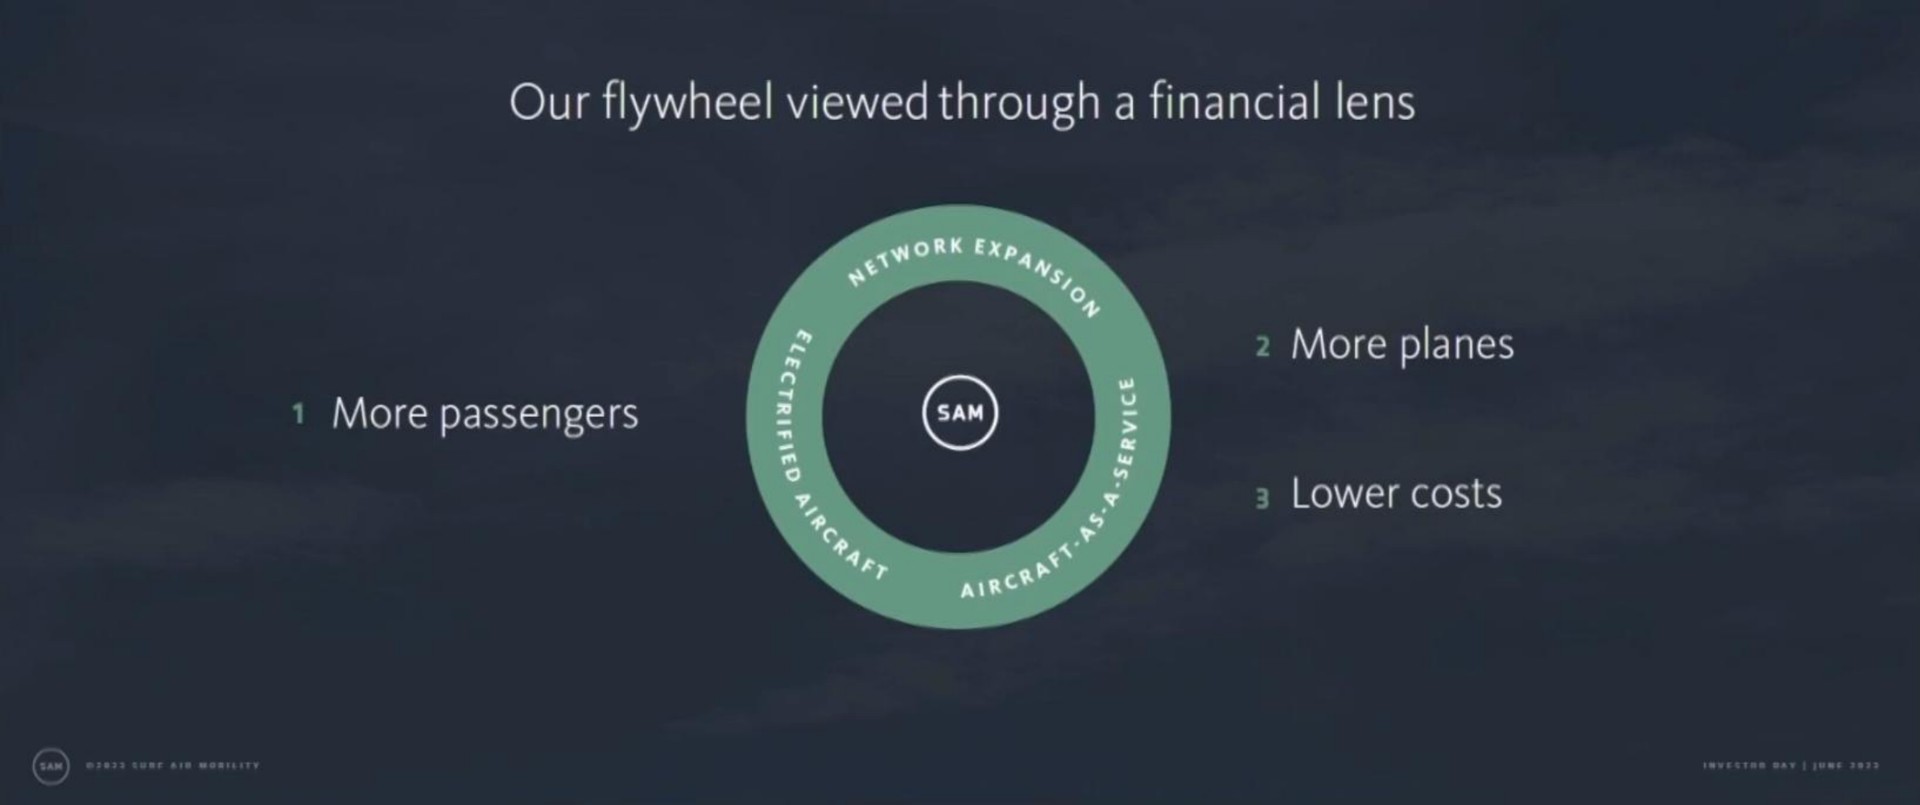 our flywheel viewed through a financial lens more passengers gan more planes lower costs | Surf Air